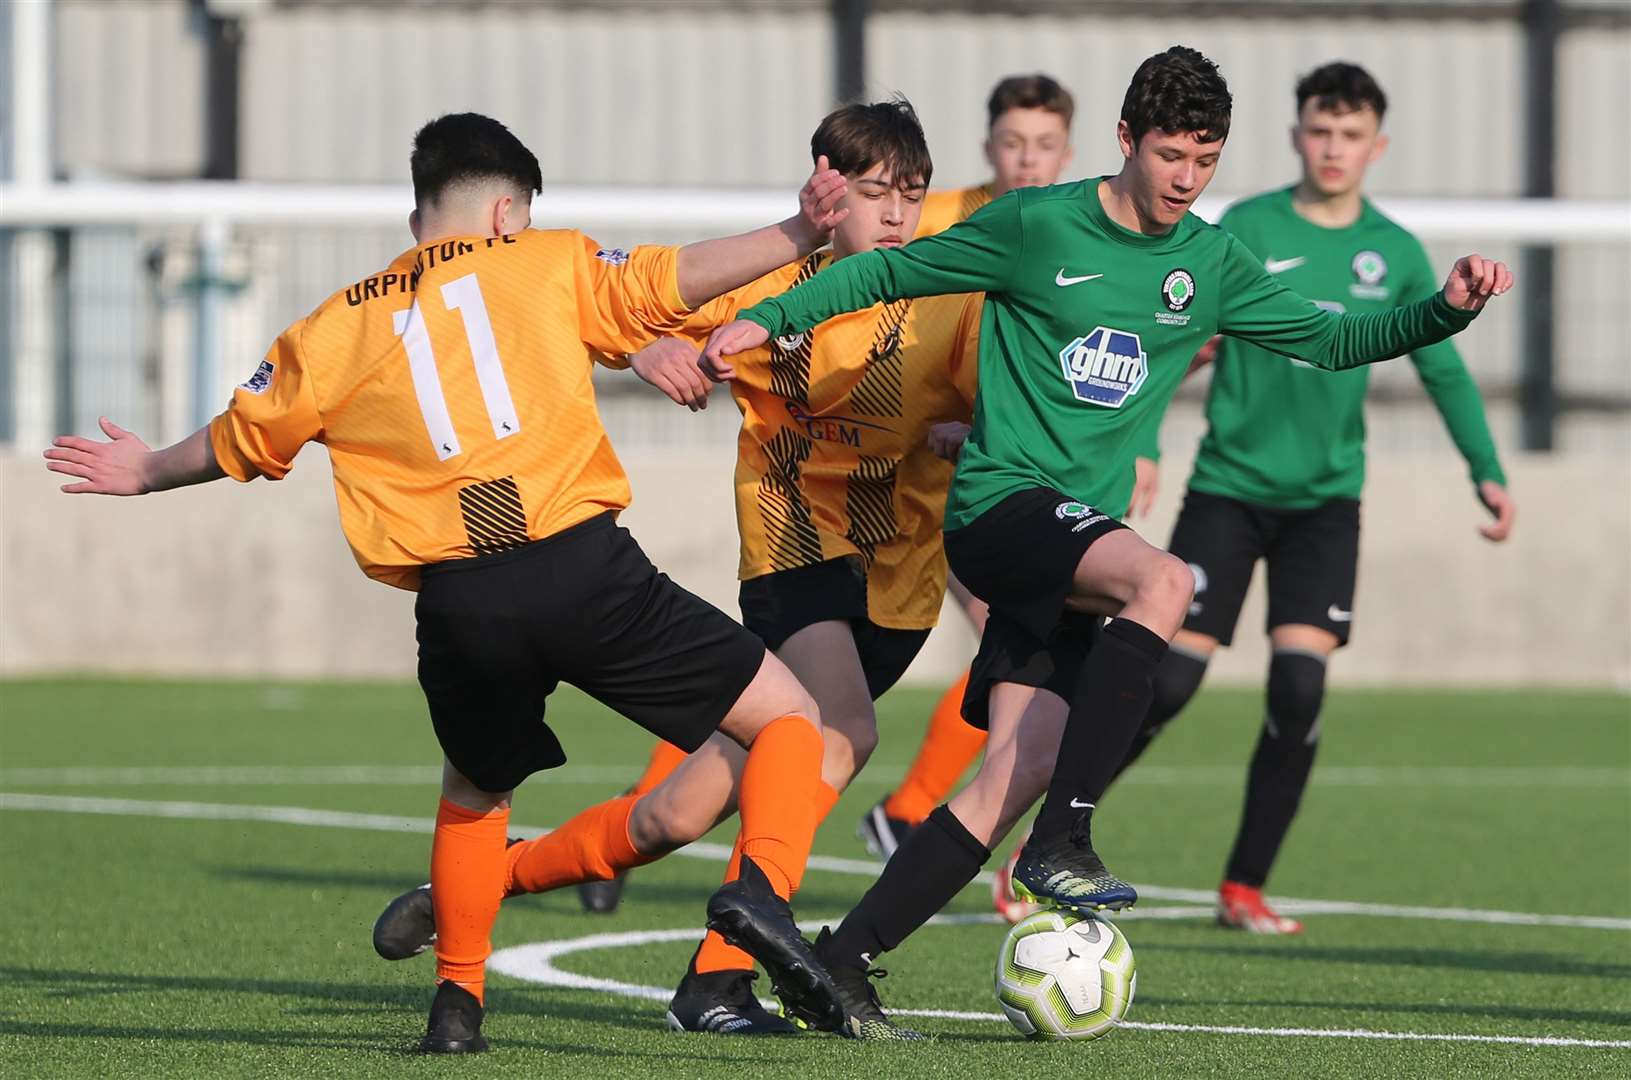 Vinters Park under-15s (green) on the ball against Orpington Mustangs under-15s. Picture: PSP Images